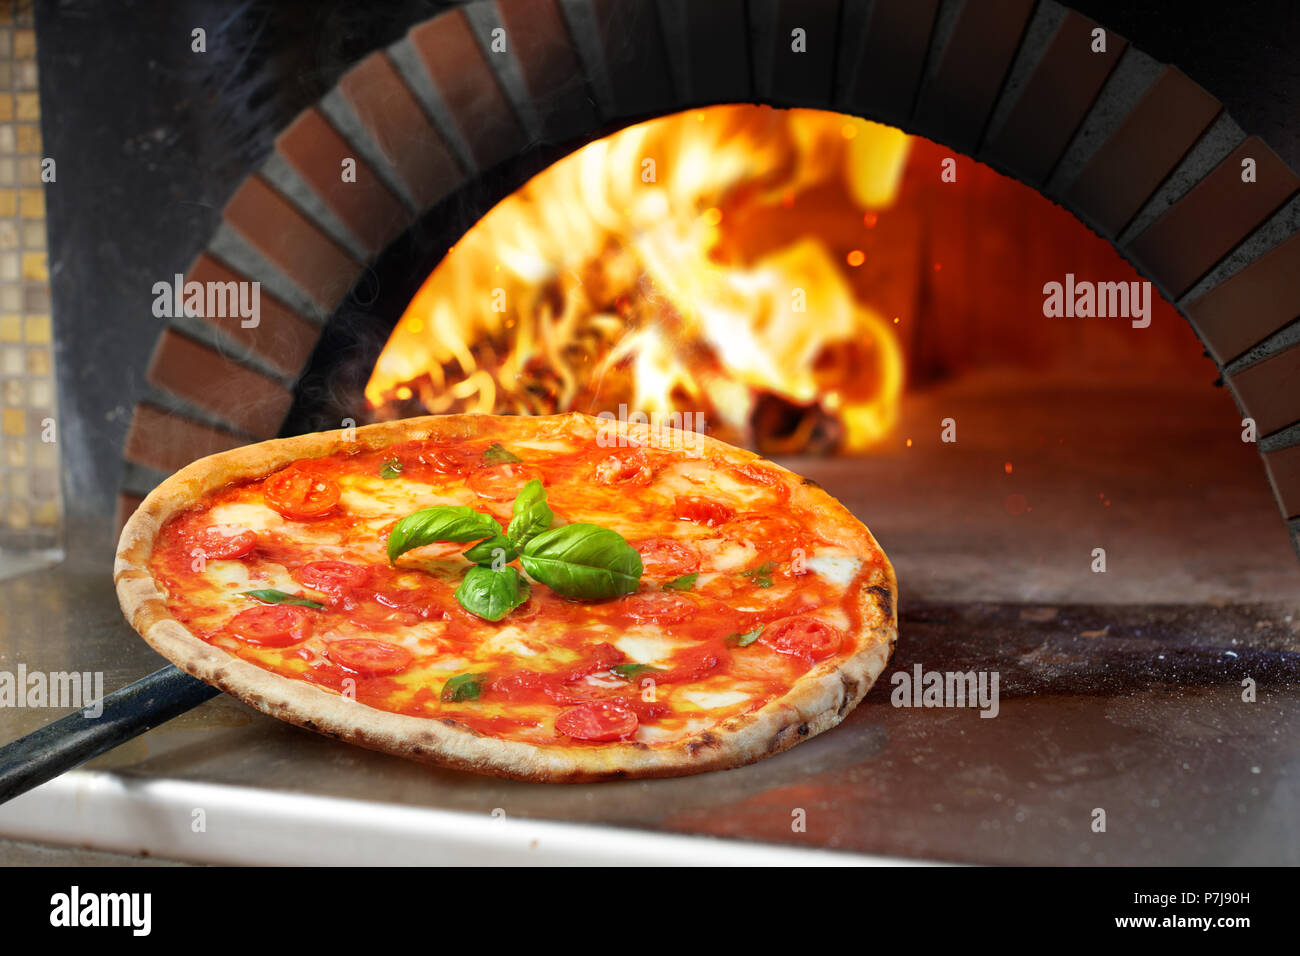 Hot Margherita Pizza Baked In Oven Stock Photo